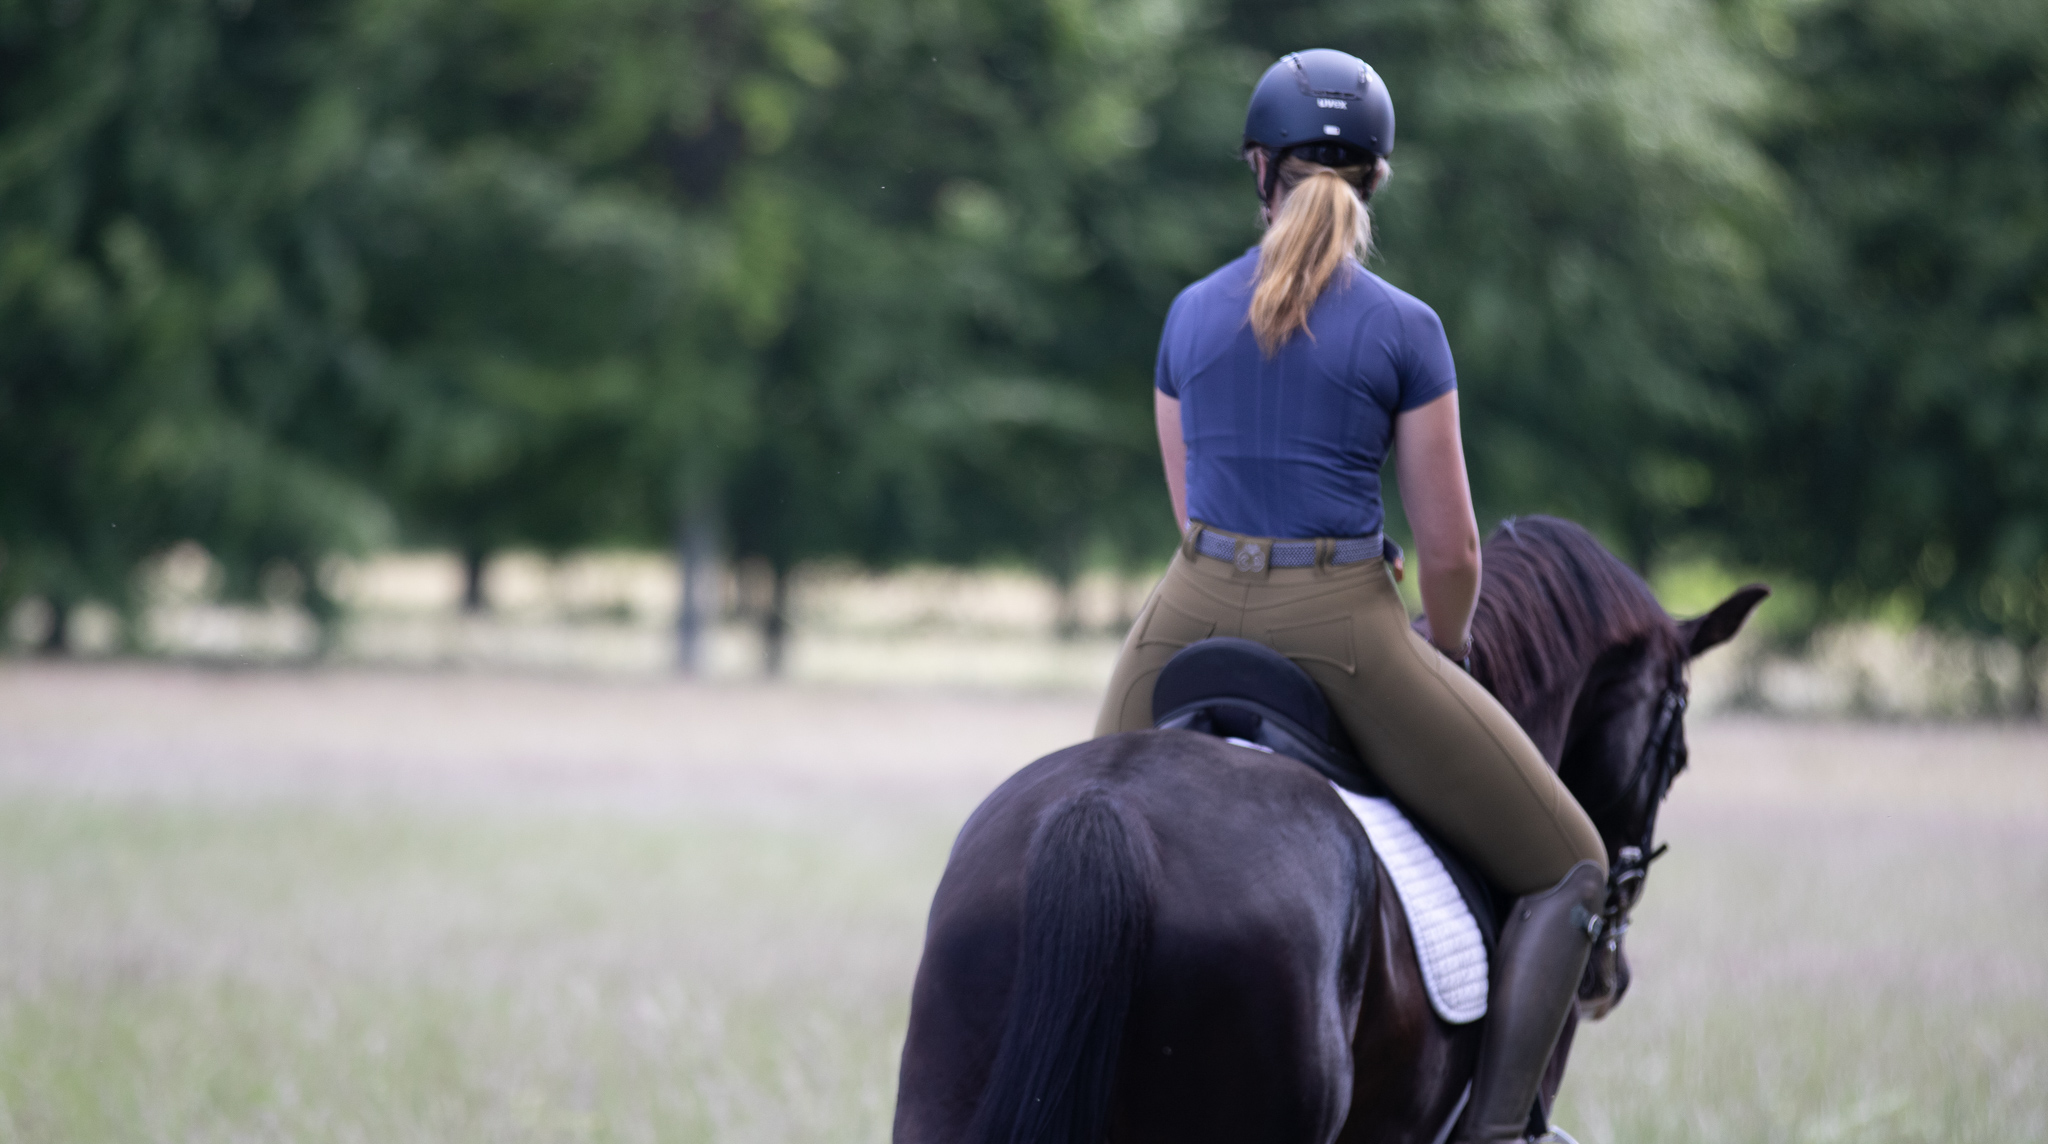 Molly Seamless Training Top - Pink – Equeene Equestrian